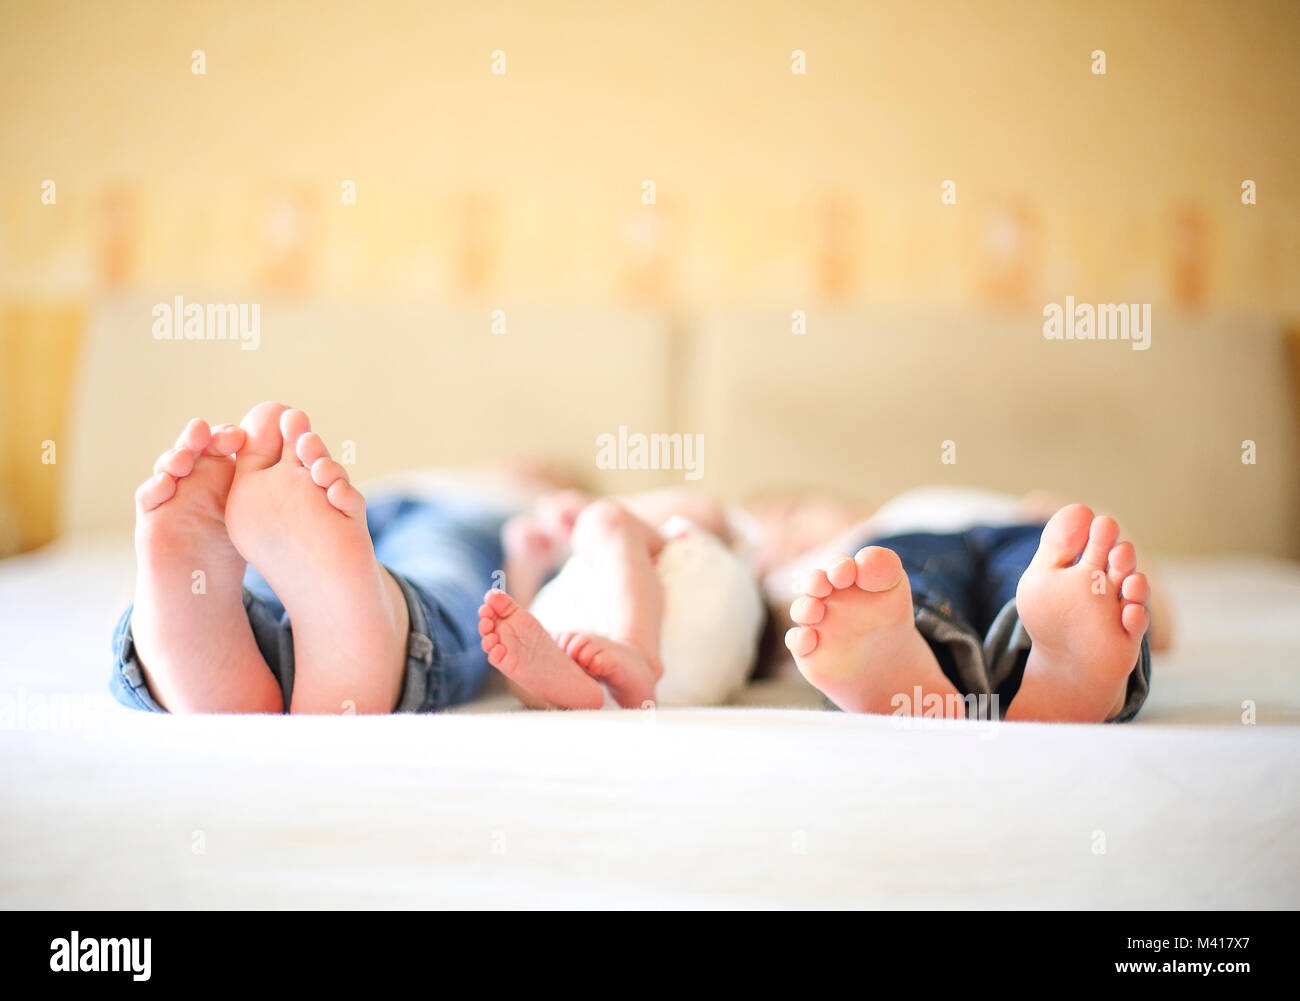 Sweet family in bed. Three sisters, close up on feet. Holiday and happiness concept Stock Photo